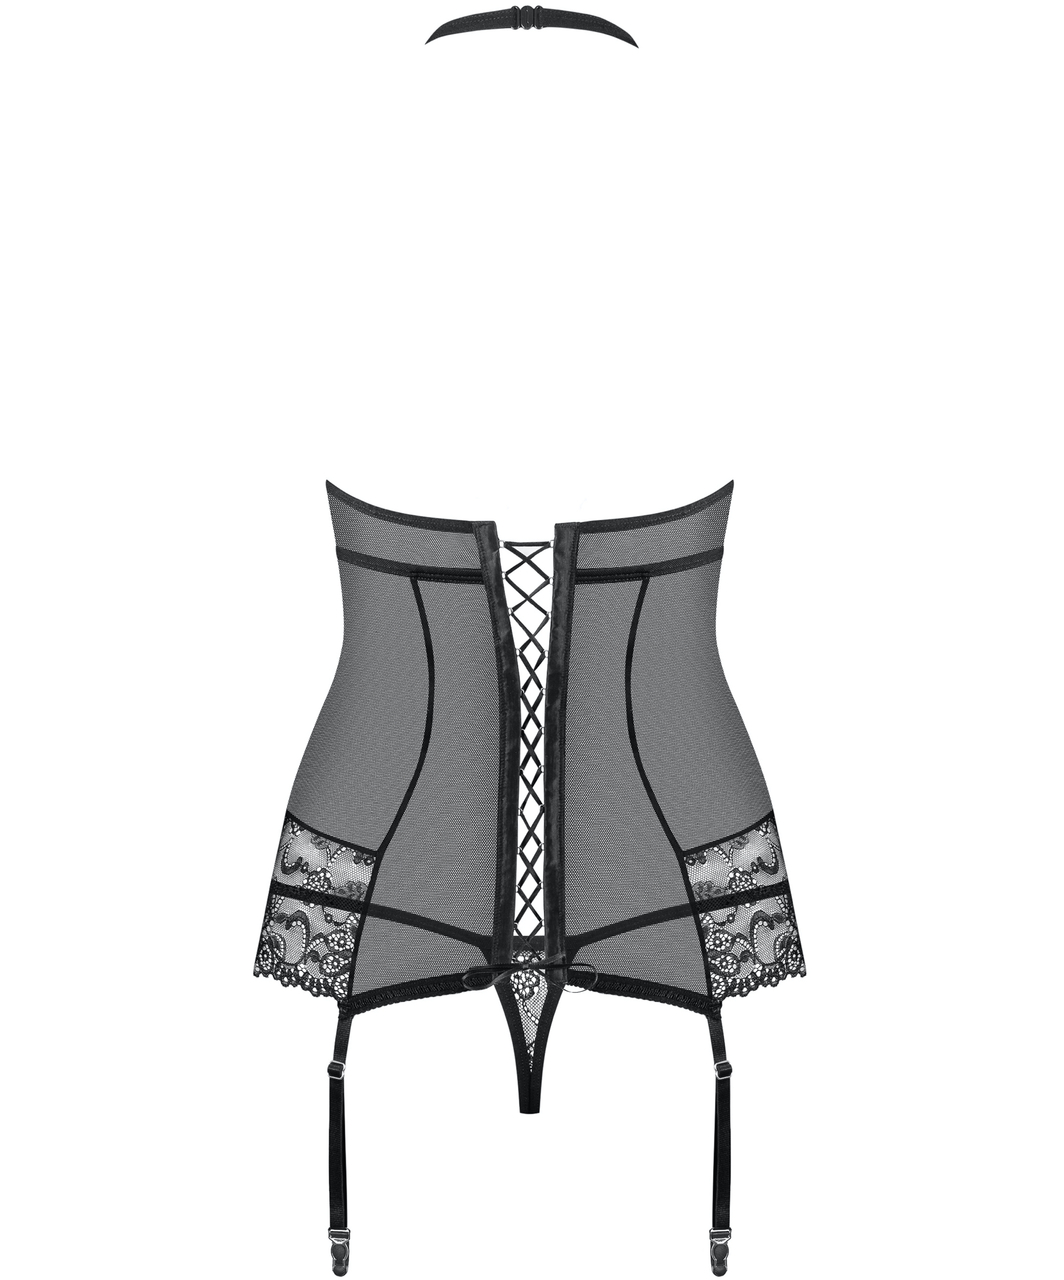 Obsessive black sheer mesh basque with string